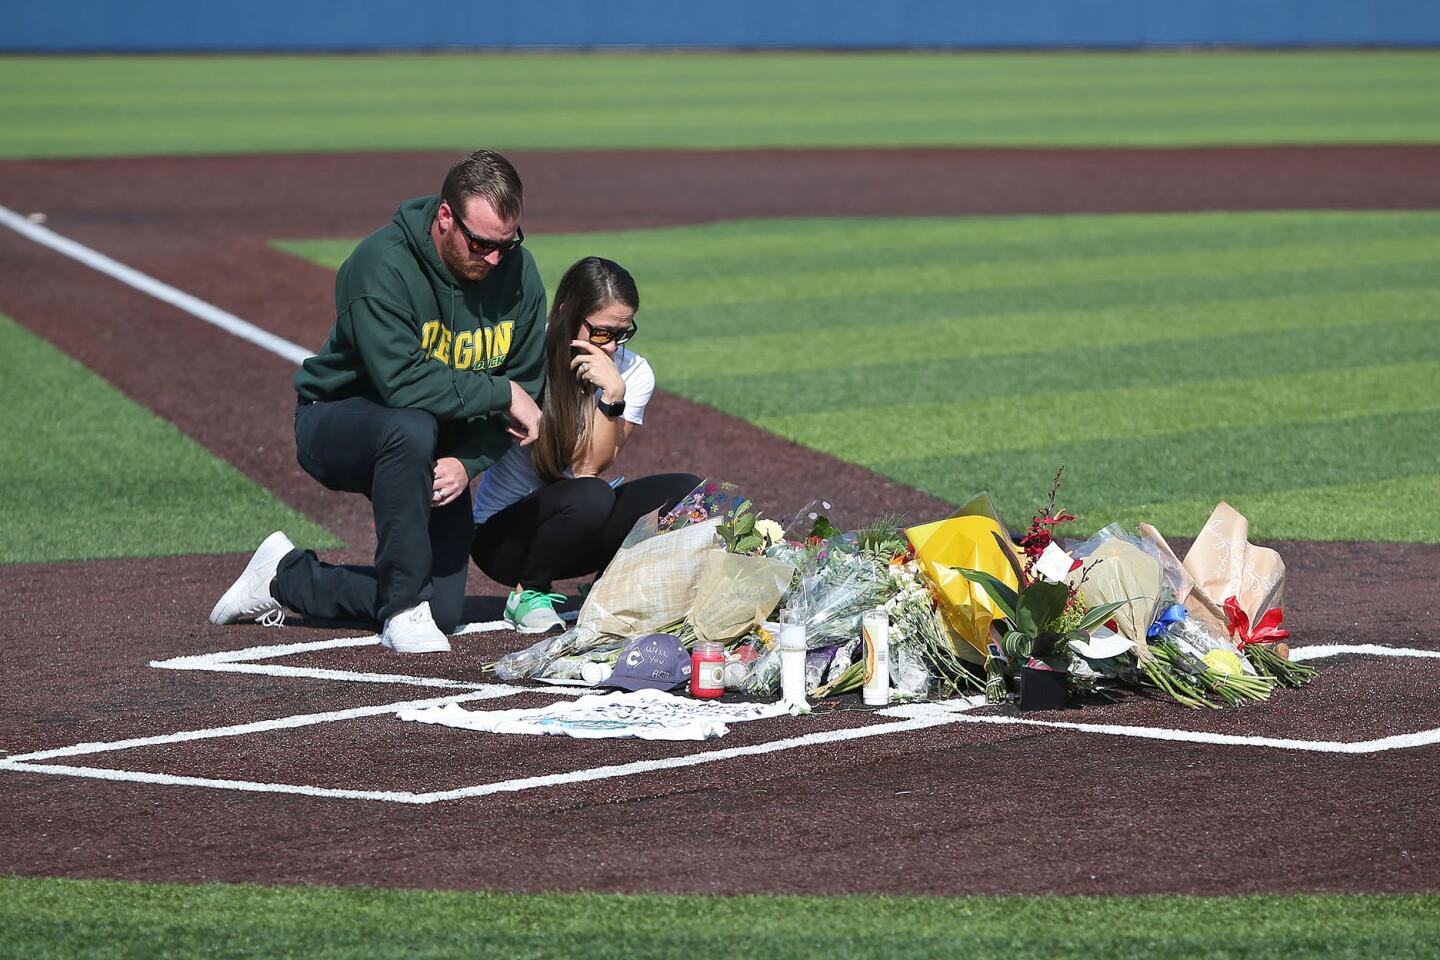 A couple pay their respects at a memorial at home plate in honor of Orange Coast College head baseball coach John Altobelli, who perished with wife Keri, and daughter, Alyssa, in Sunday's helicopter crash with Kobe Bryant.